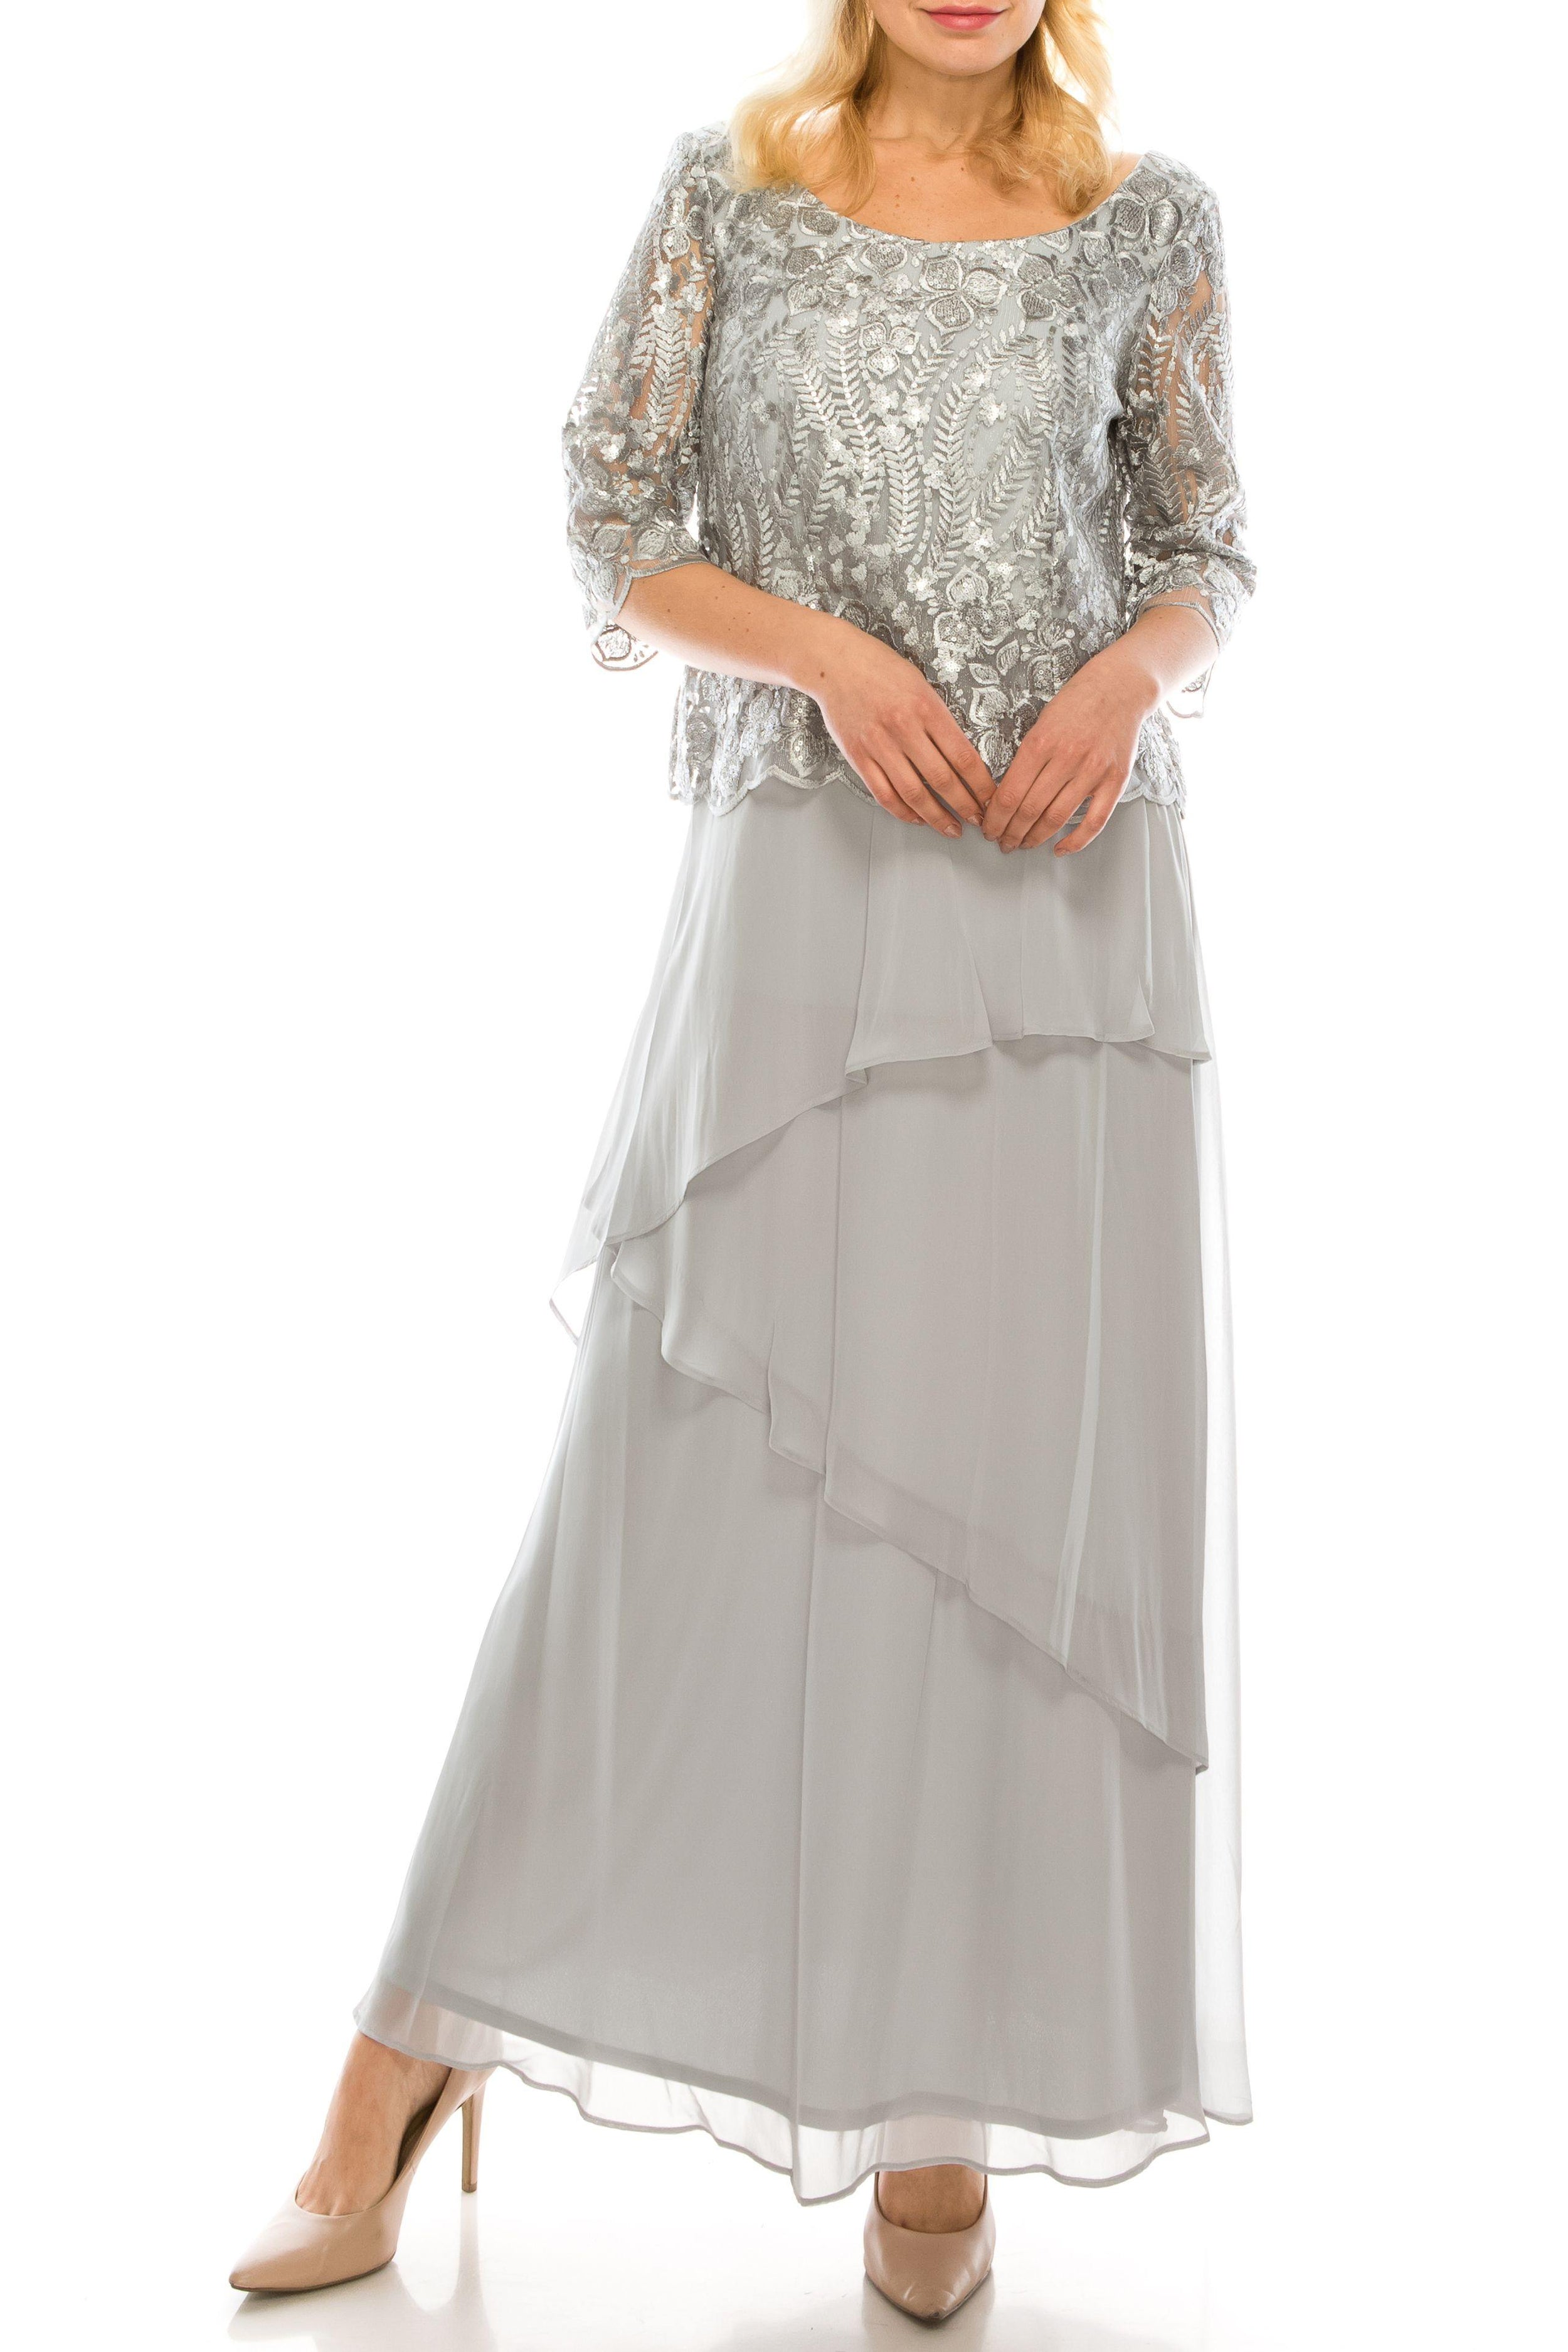 Le Bos Mother of the Bride Long Chiffon Dress 26963 - The Dress Outlet